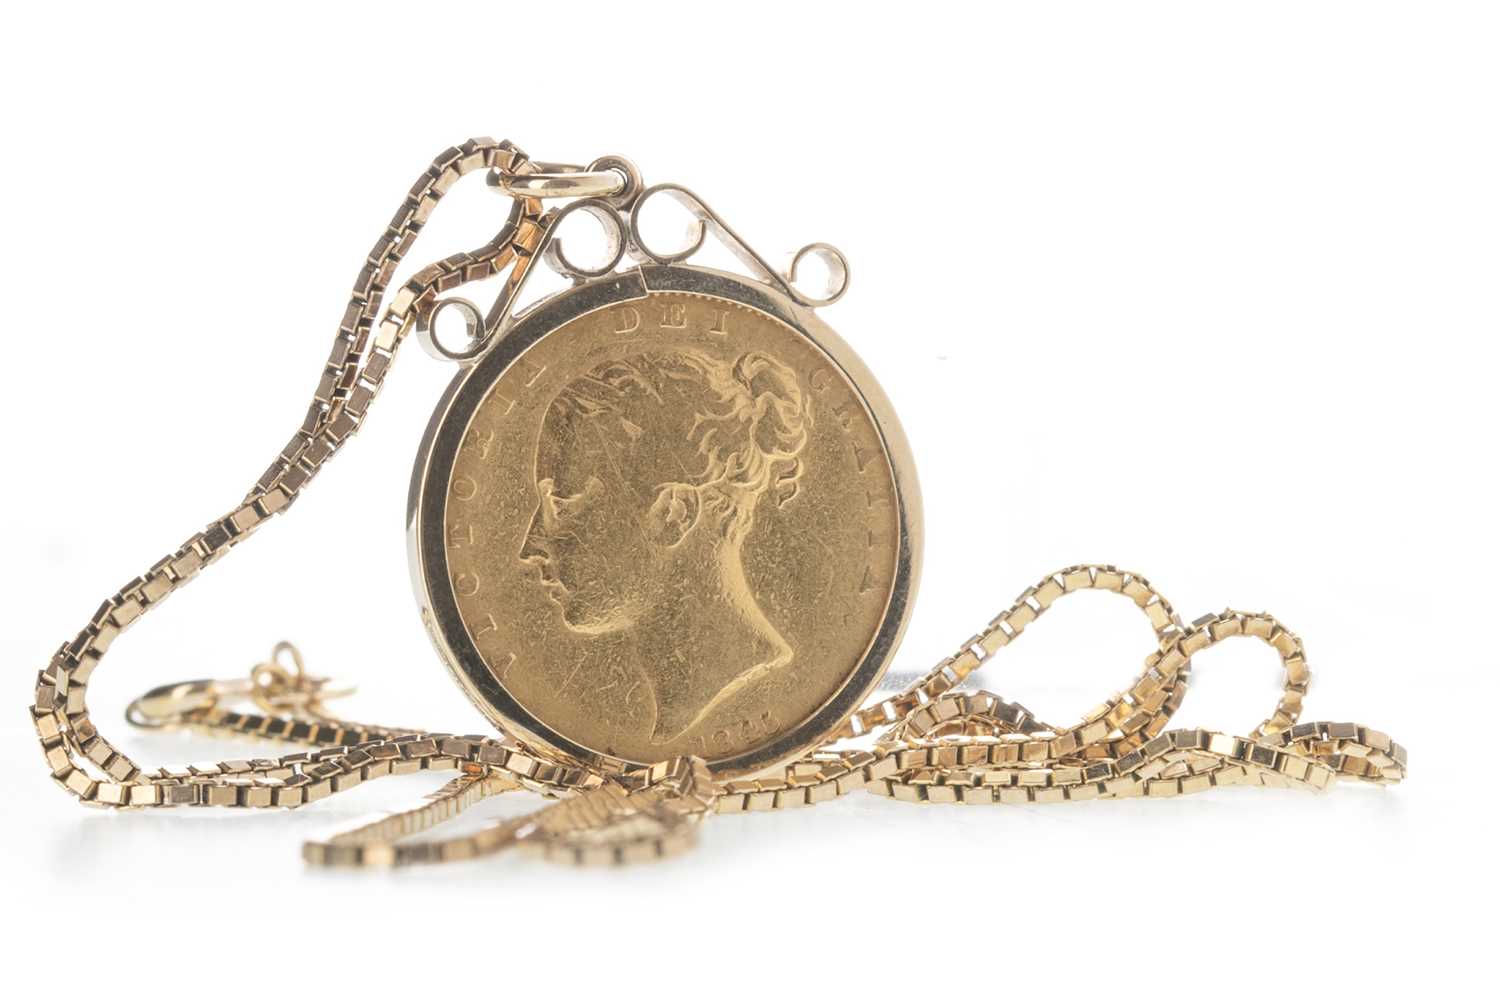 Lot 10 - A QUEEN VICTORIA (1837 - 1901) GOLD SOVEREIGN DATED 1845 ON A CHAIN